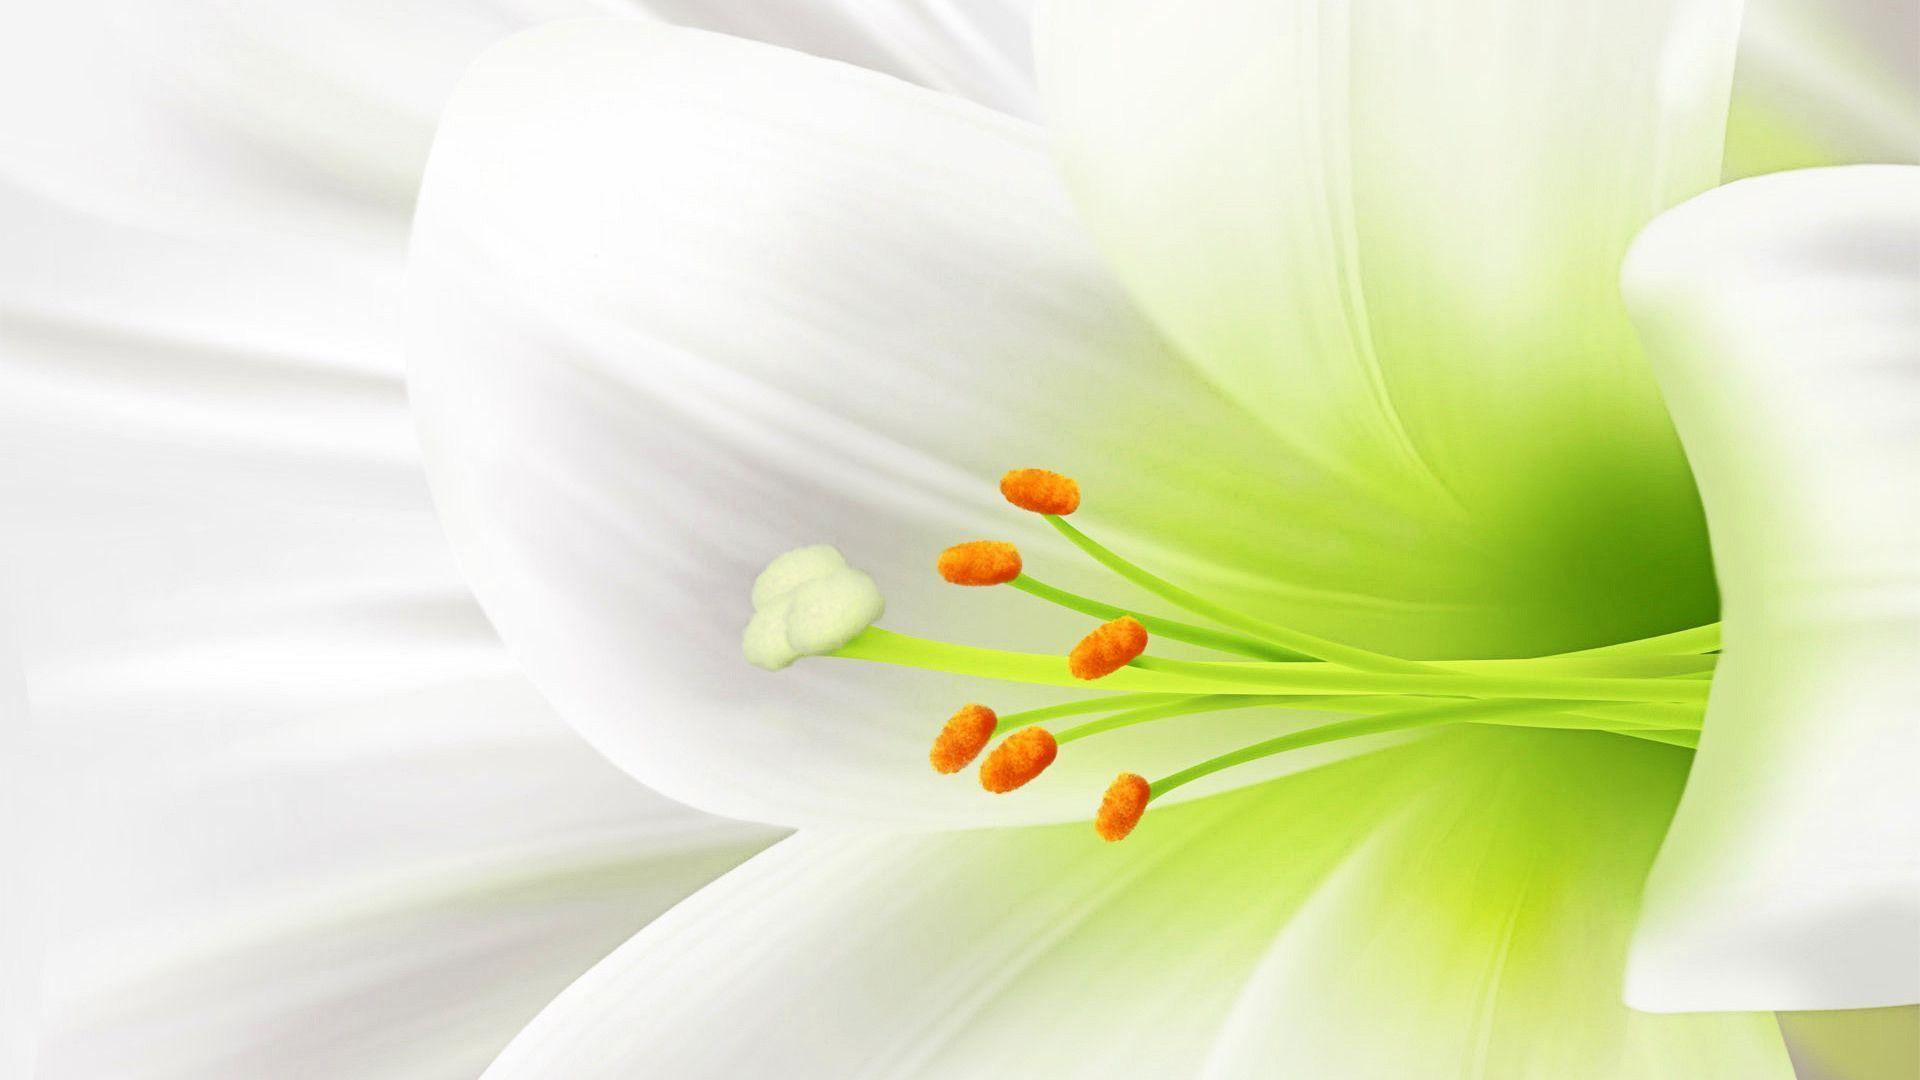 White Flower Wallpapers - Wallpaper Cave